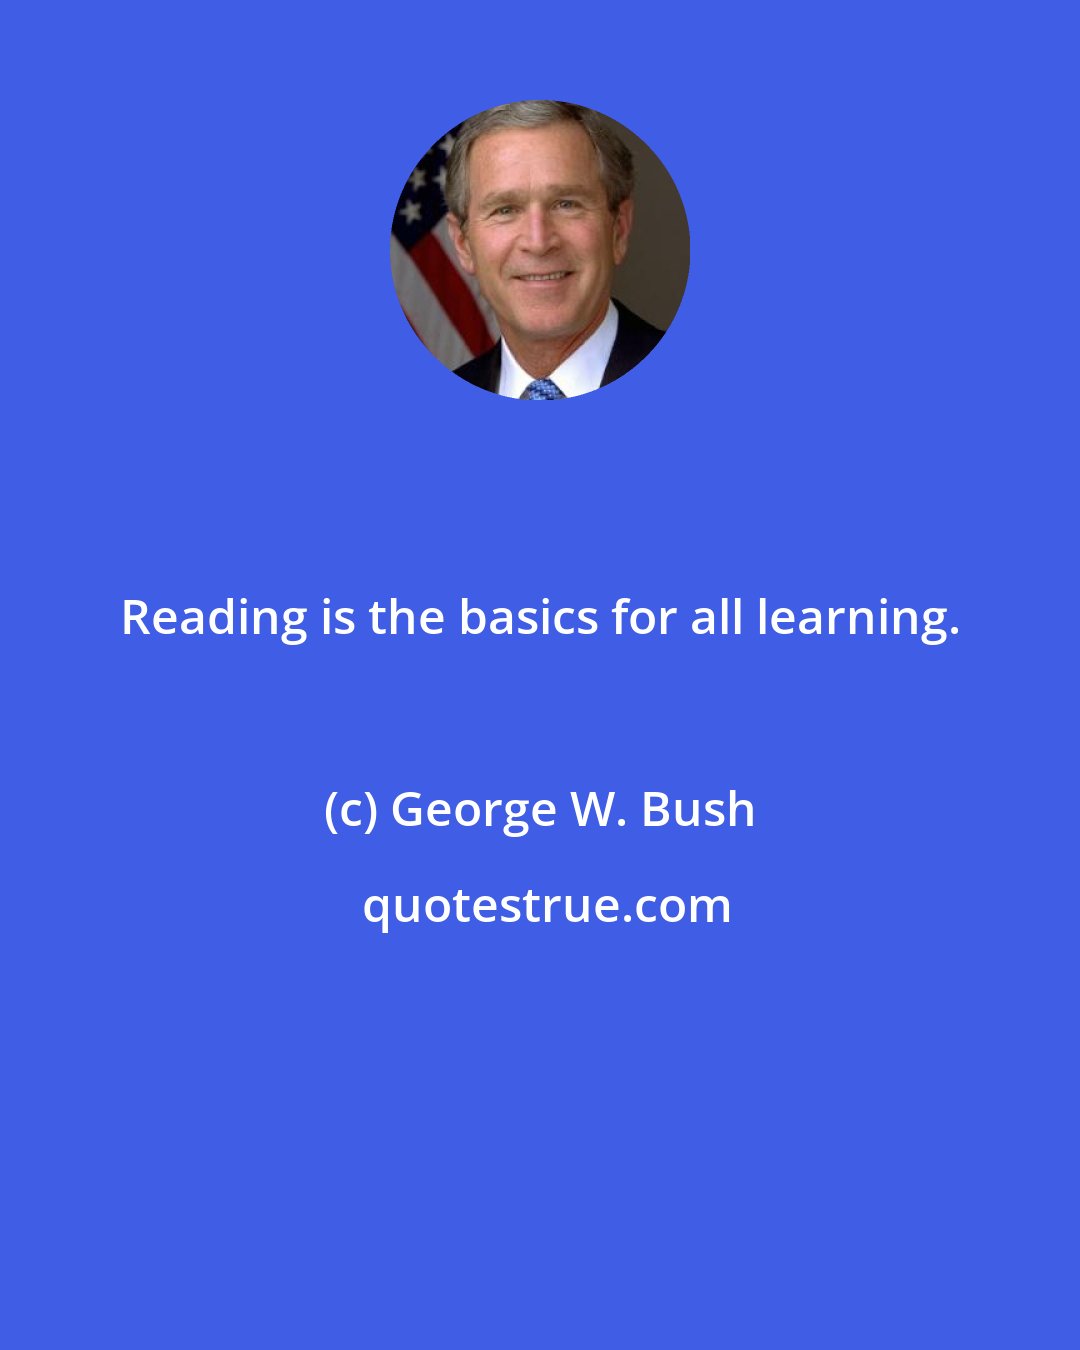 George W. Bush: Reading is the basics for all learning.